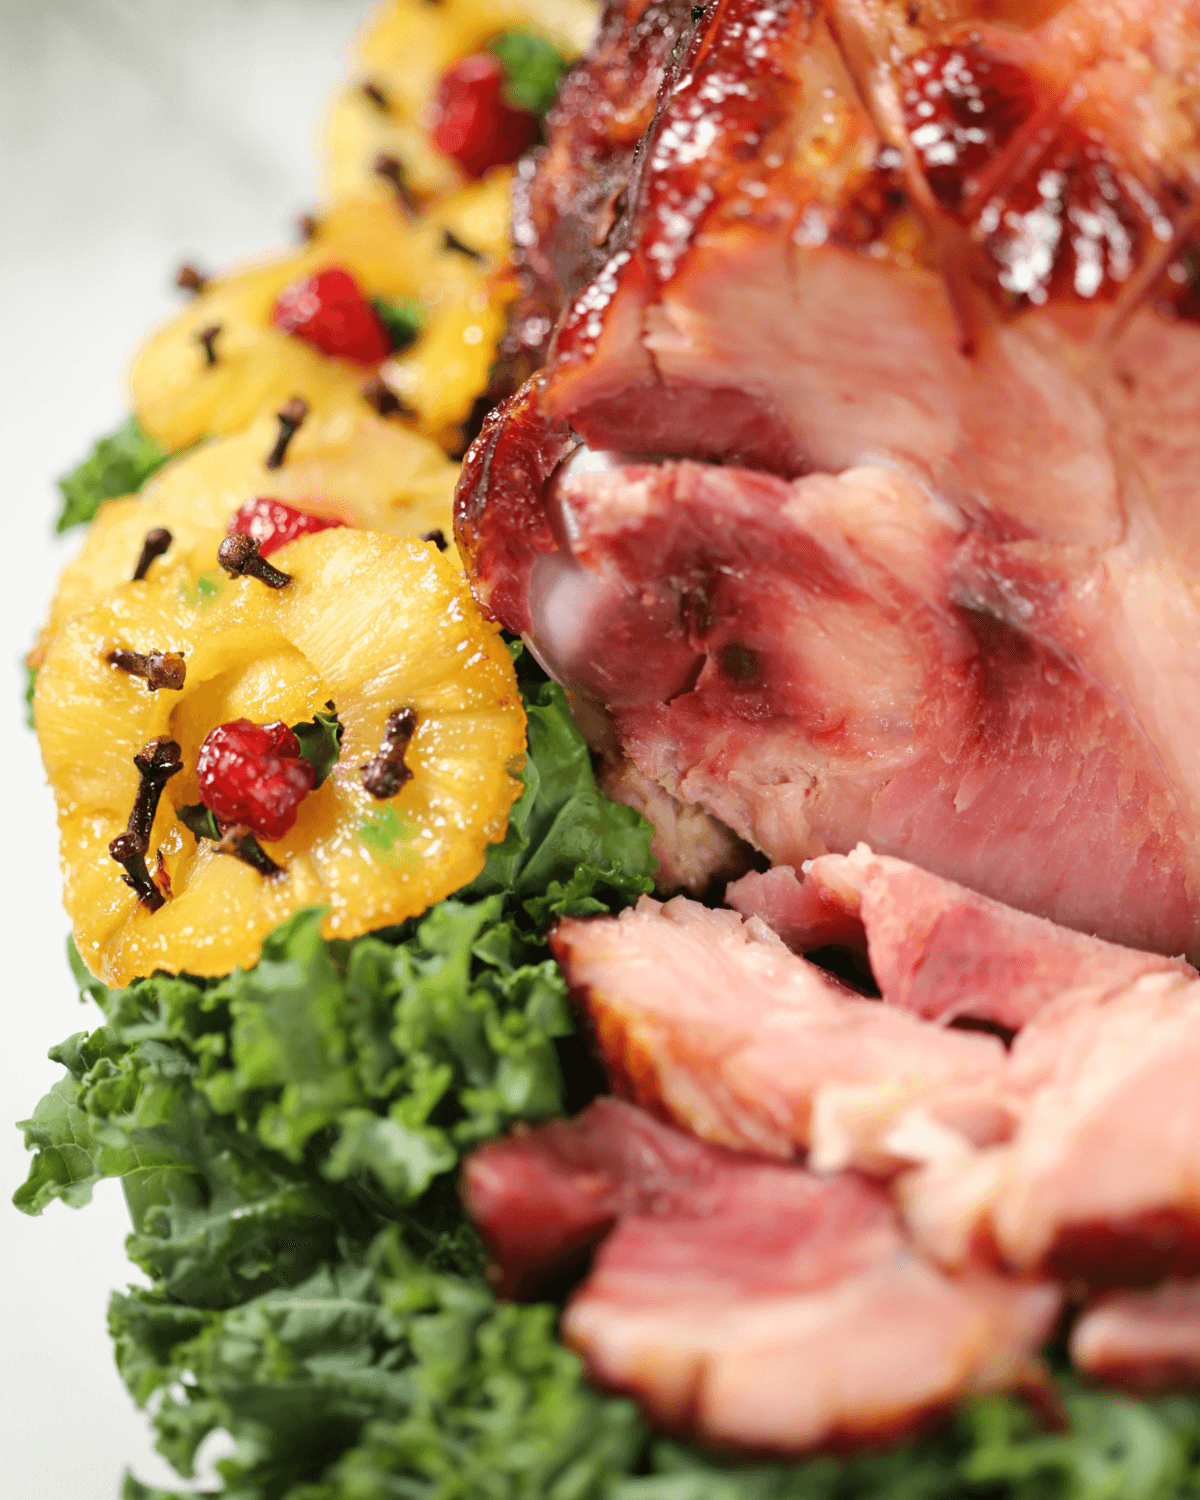 A whole ham studded with pineapple and cherries.